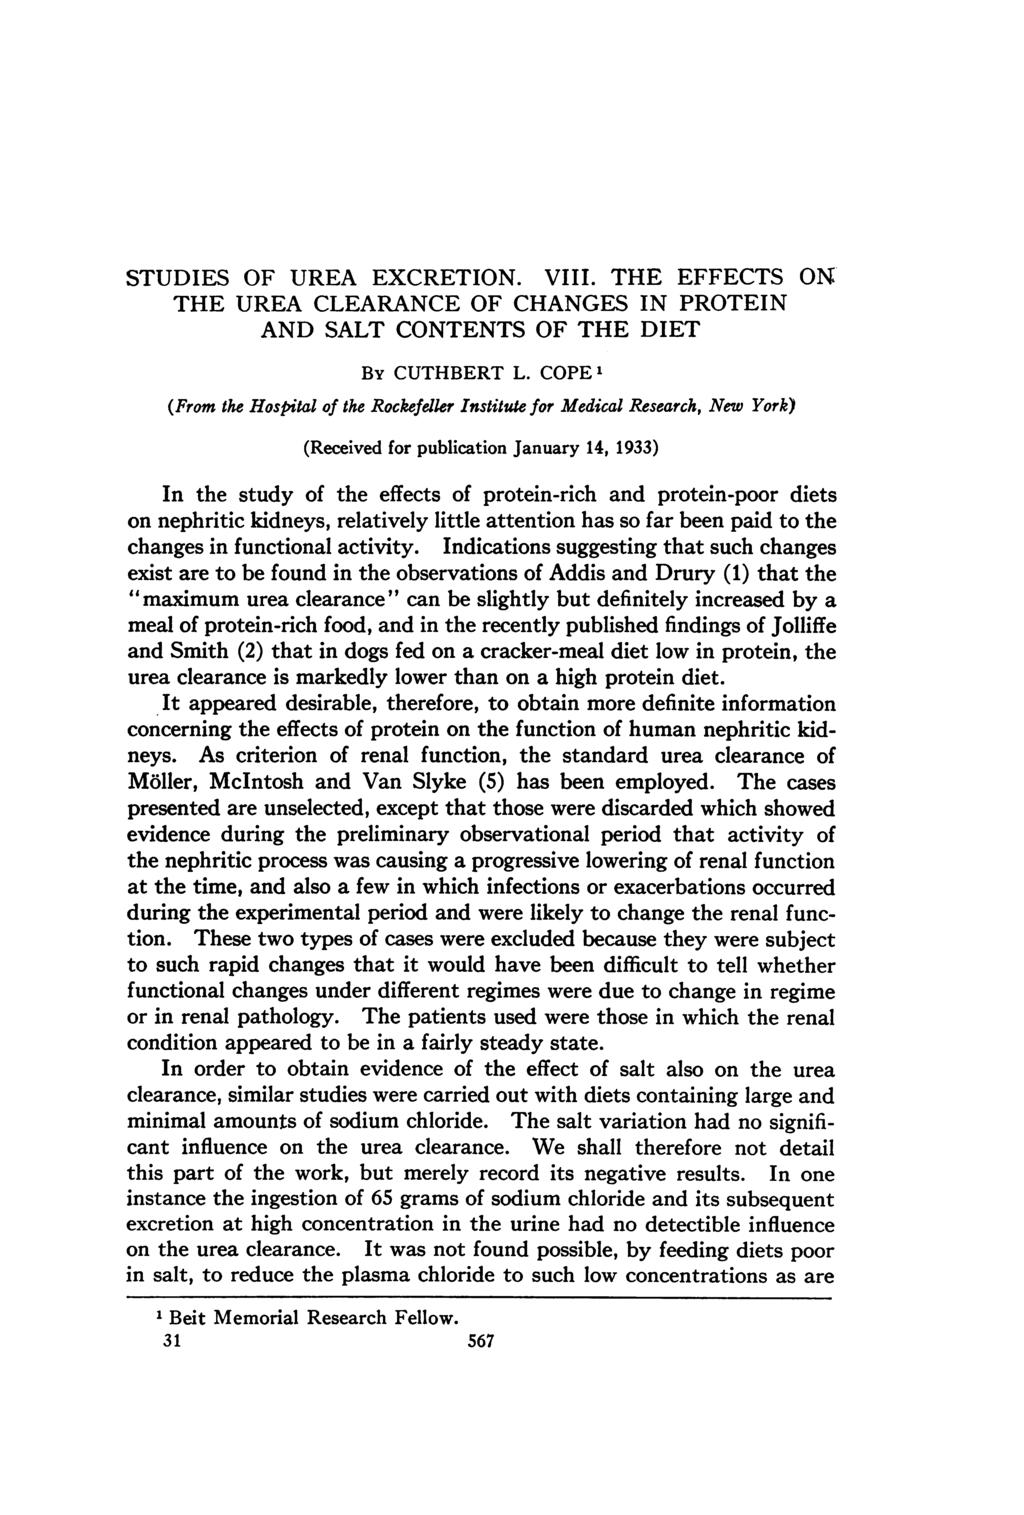 STUDIES OF UREA EXCRETION. VIII. THE EFFECTS ON THE UREA CLEARANCE OF CHANGES IN PROTEIN AND SALT CONTENTS OF THE DIET BY CUTHBERT L.